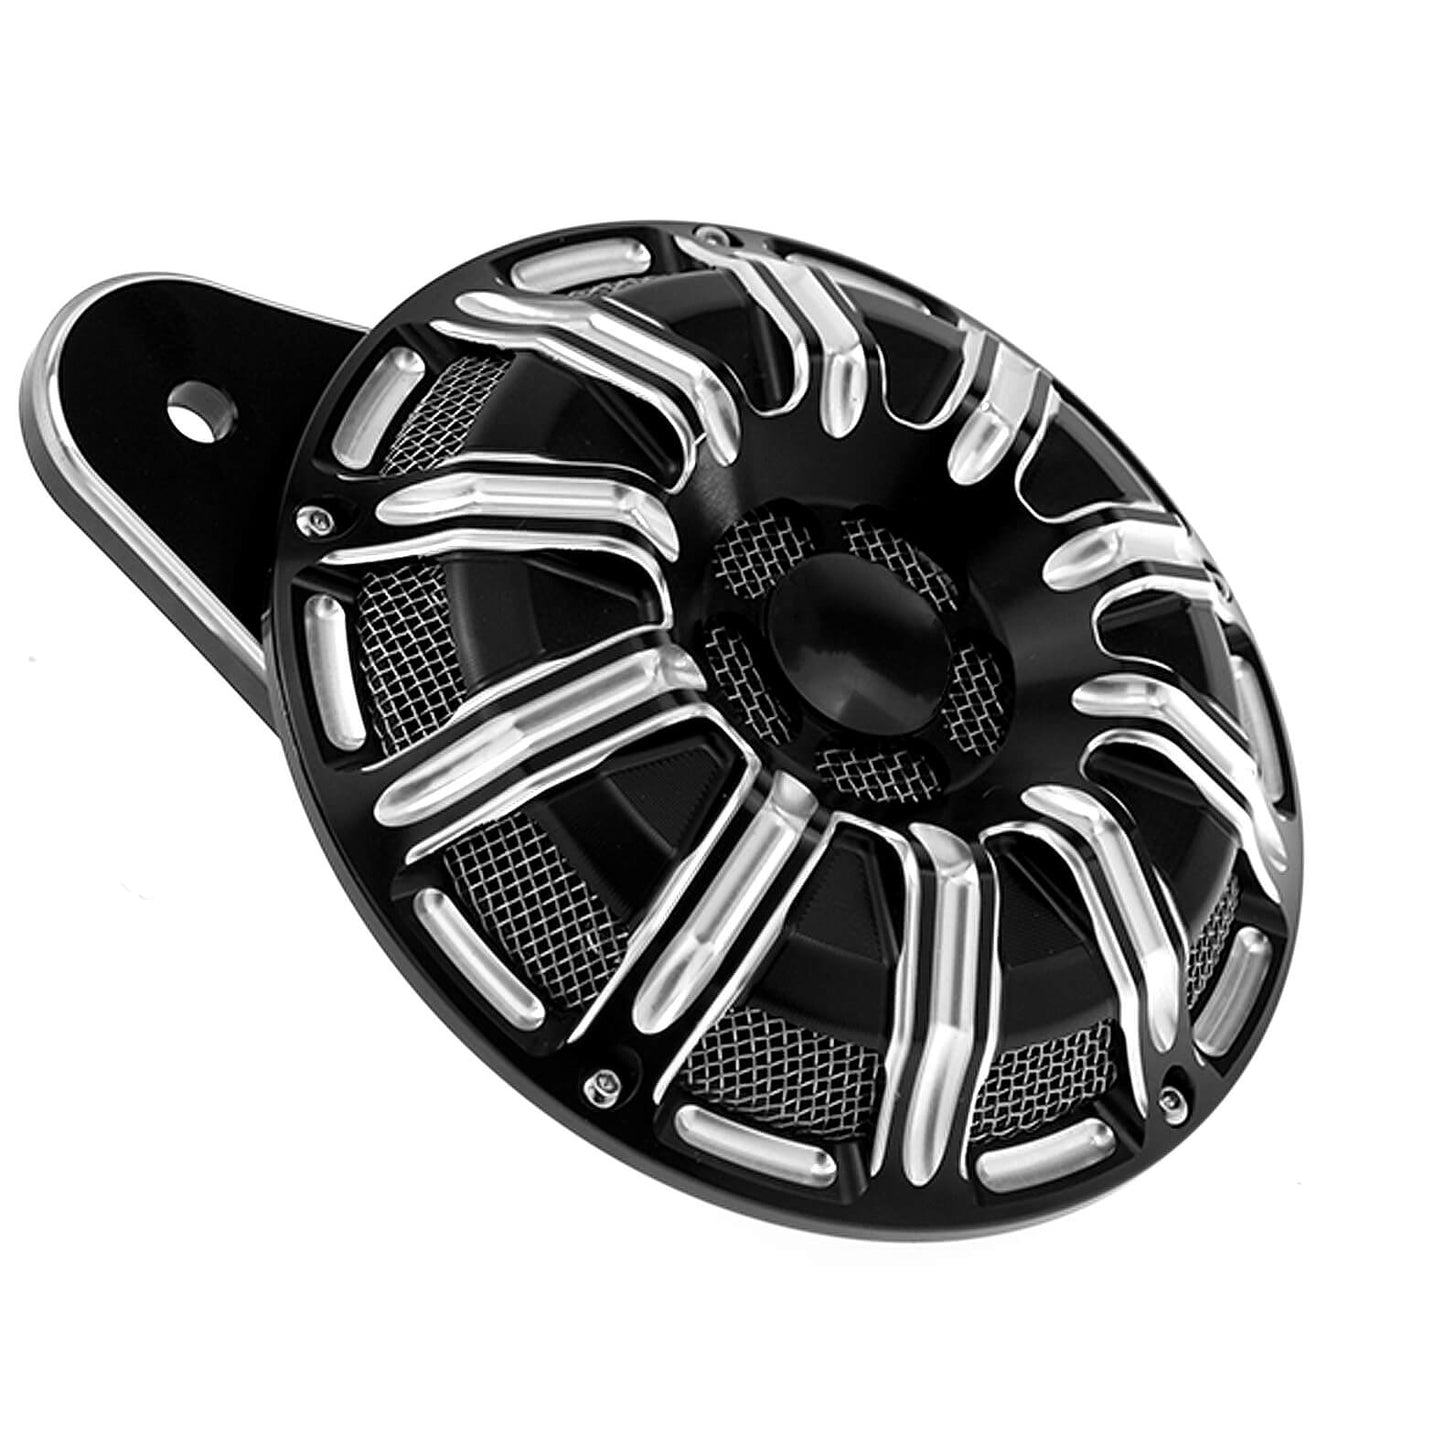 TH007601-mactions-high-performance-cnc-horn-cover-for-harley